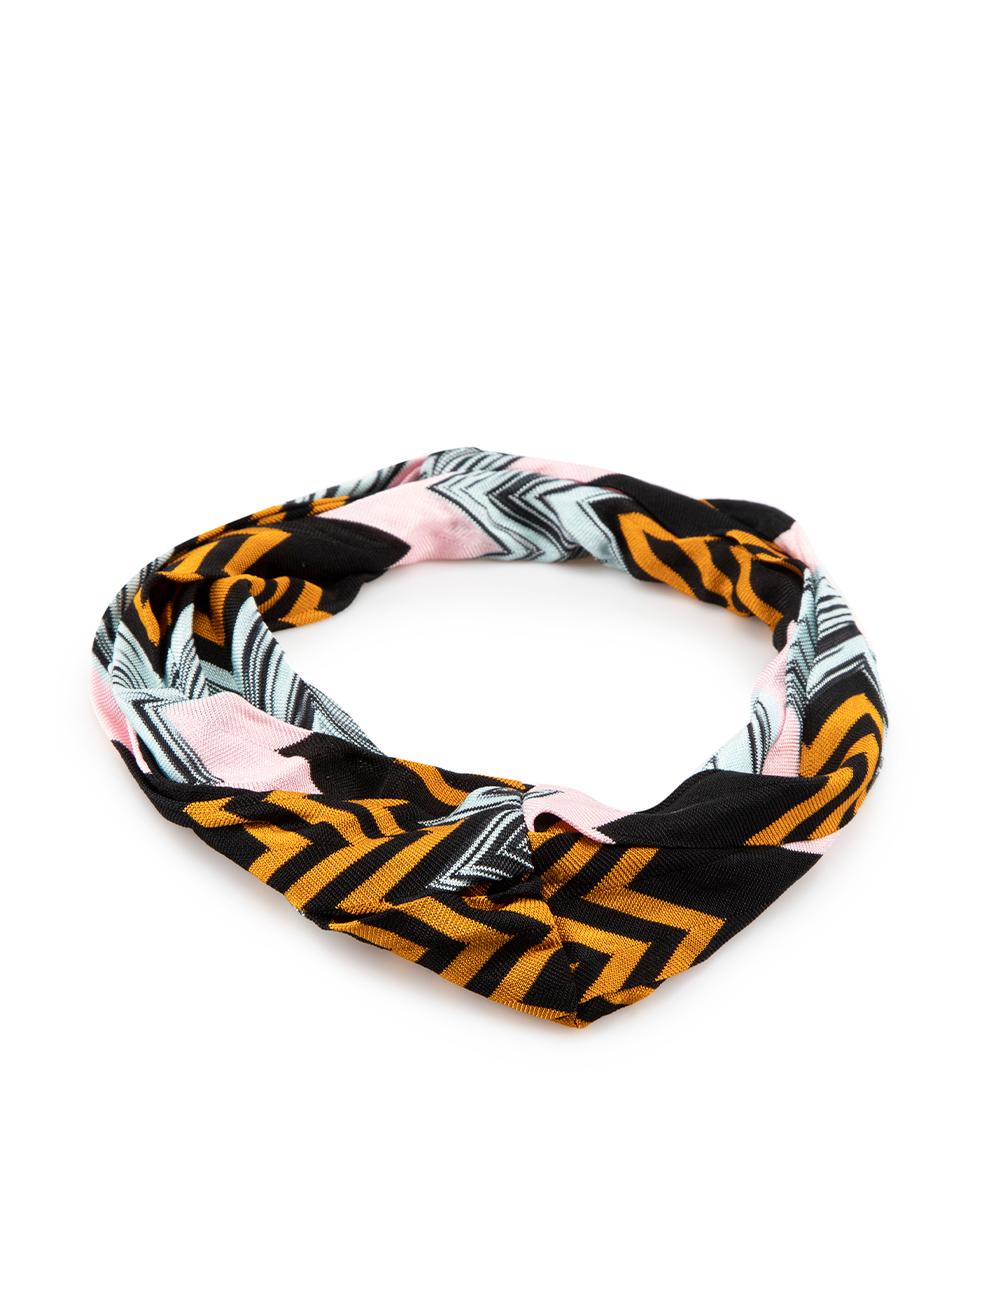 CONDITION is Very good. Minimal wear to headband is evident. Minimal wear to the layered twist join with a small pull to the fabric on this used Missoni designer resale item.



Details


Multicolour

Synthetic

Headband

Zigzag